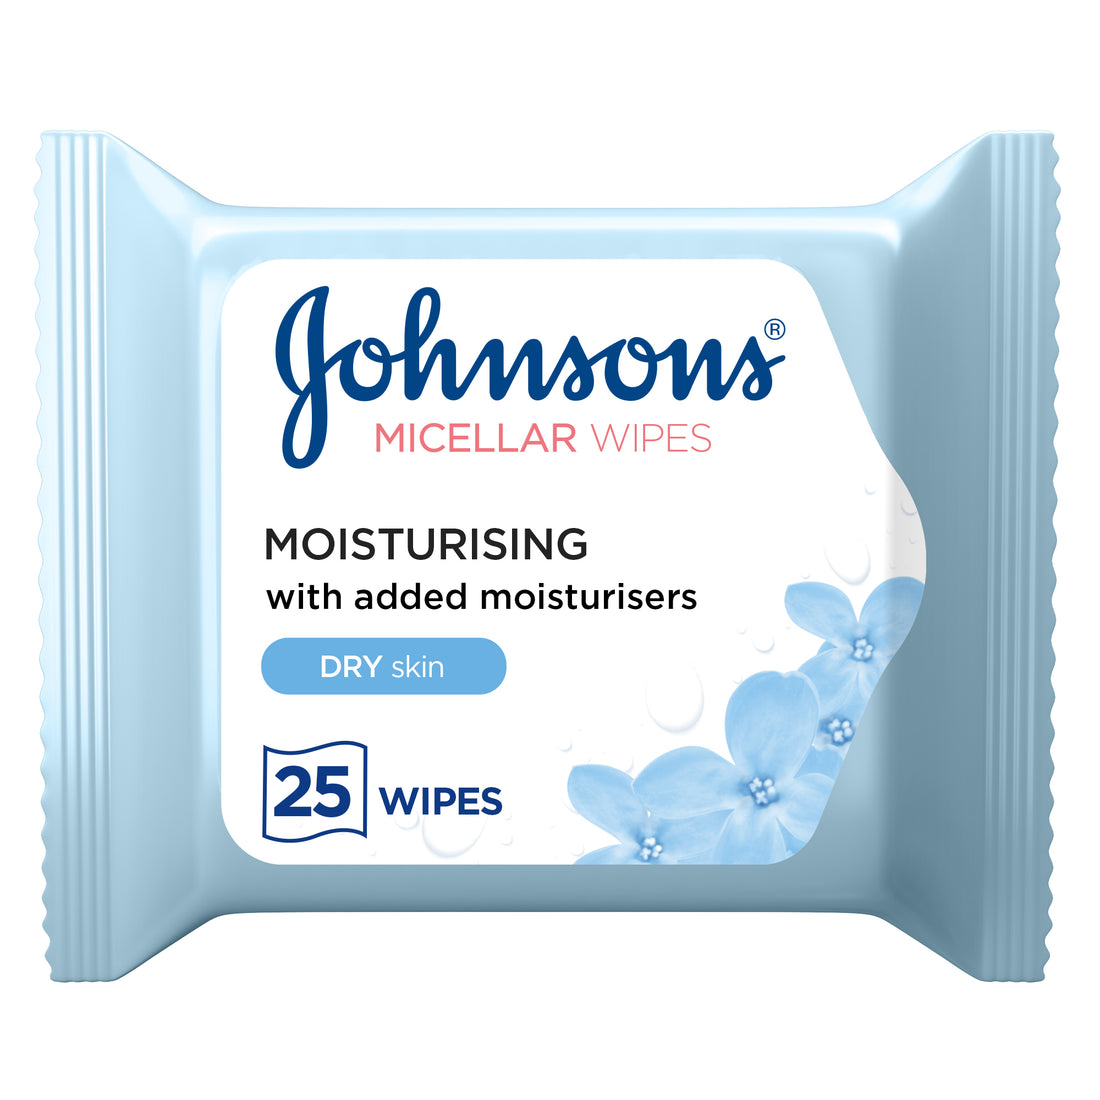 JOHNSON’S Cleansing Facial Micellar Wipes, Moisturising, Dry Skin, Pack of 25 wipes